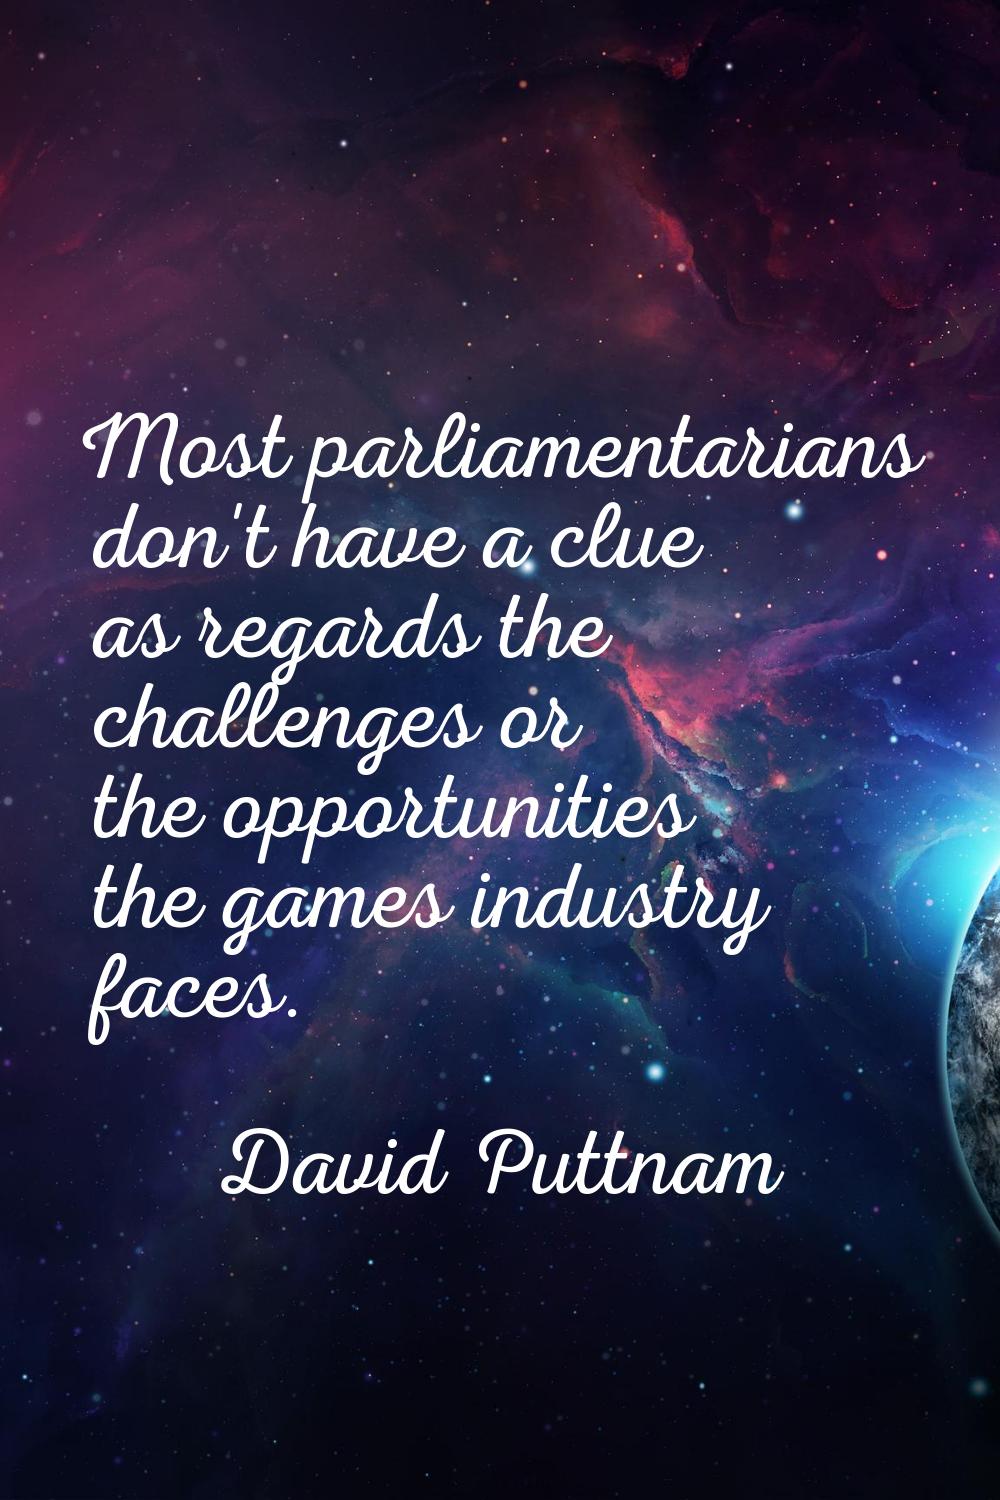 Most parliamentarians don't have a clue as regards the challenges or the opportunities the games in